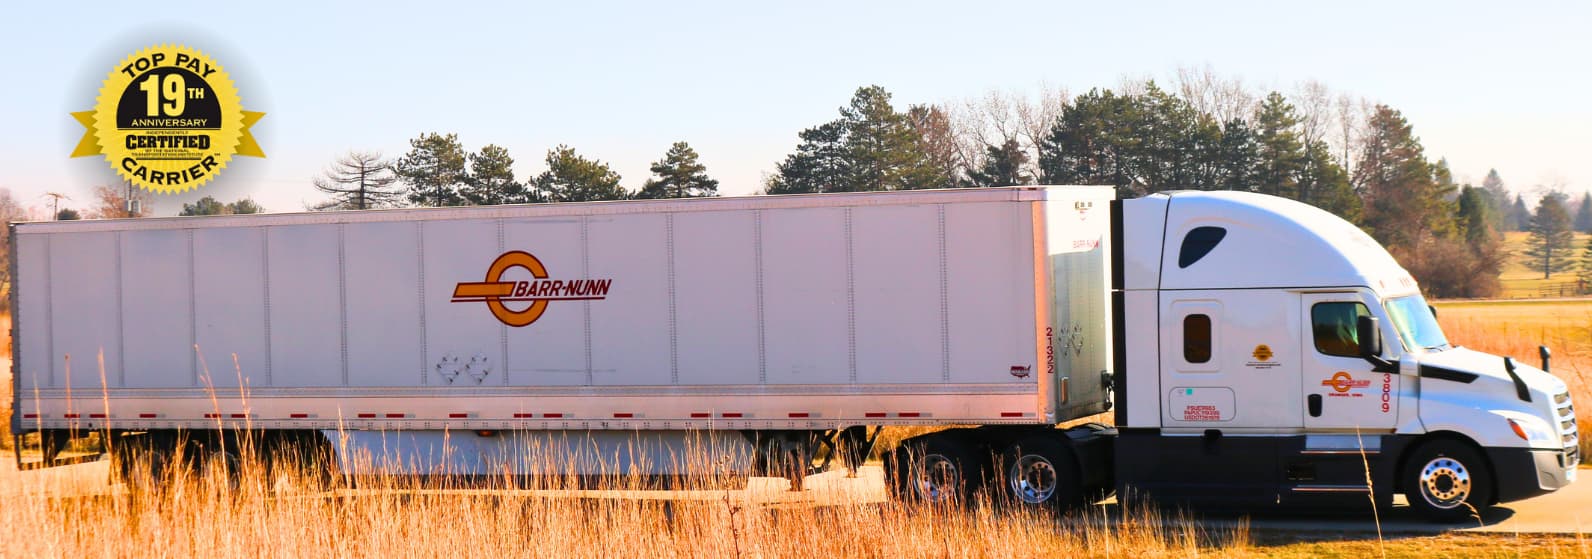 Barr-Nunn Truck with company facts and Top Pay Certified Carrier logo